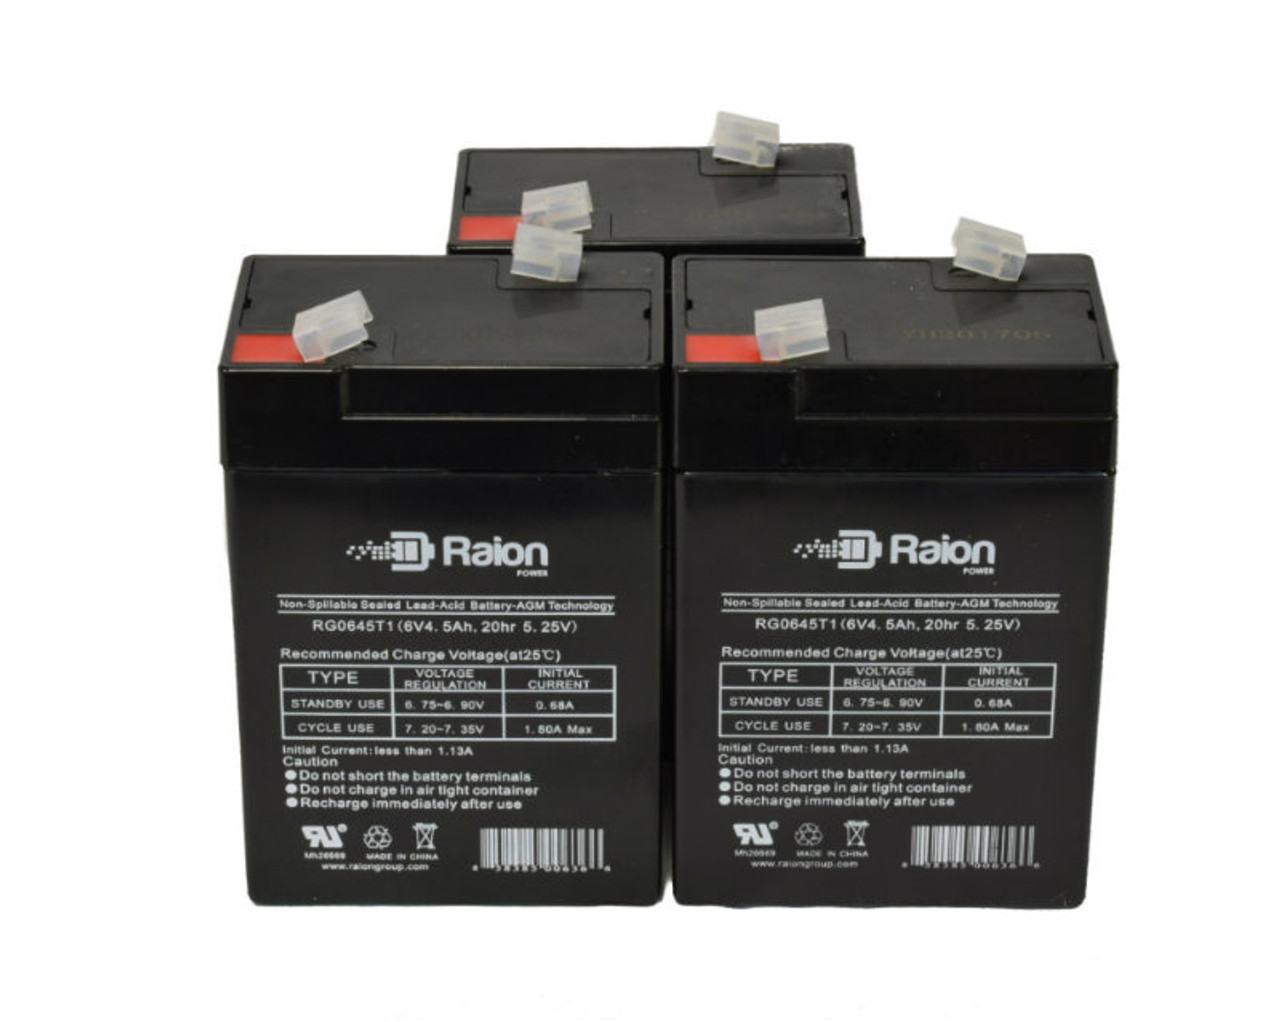 Raion Power RG0645T1 6V 4.5Ah Replacement Medical Equipment Battery for Castle Co 4900 Shampaine Surgical Table - 3 Pack